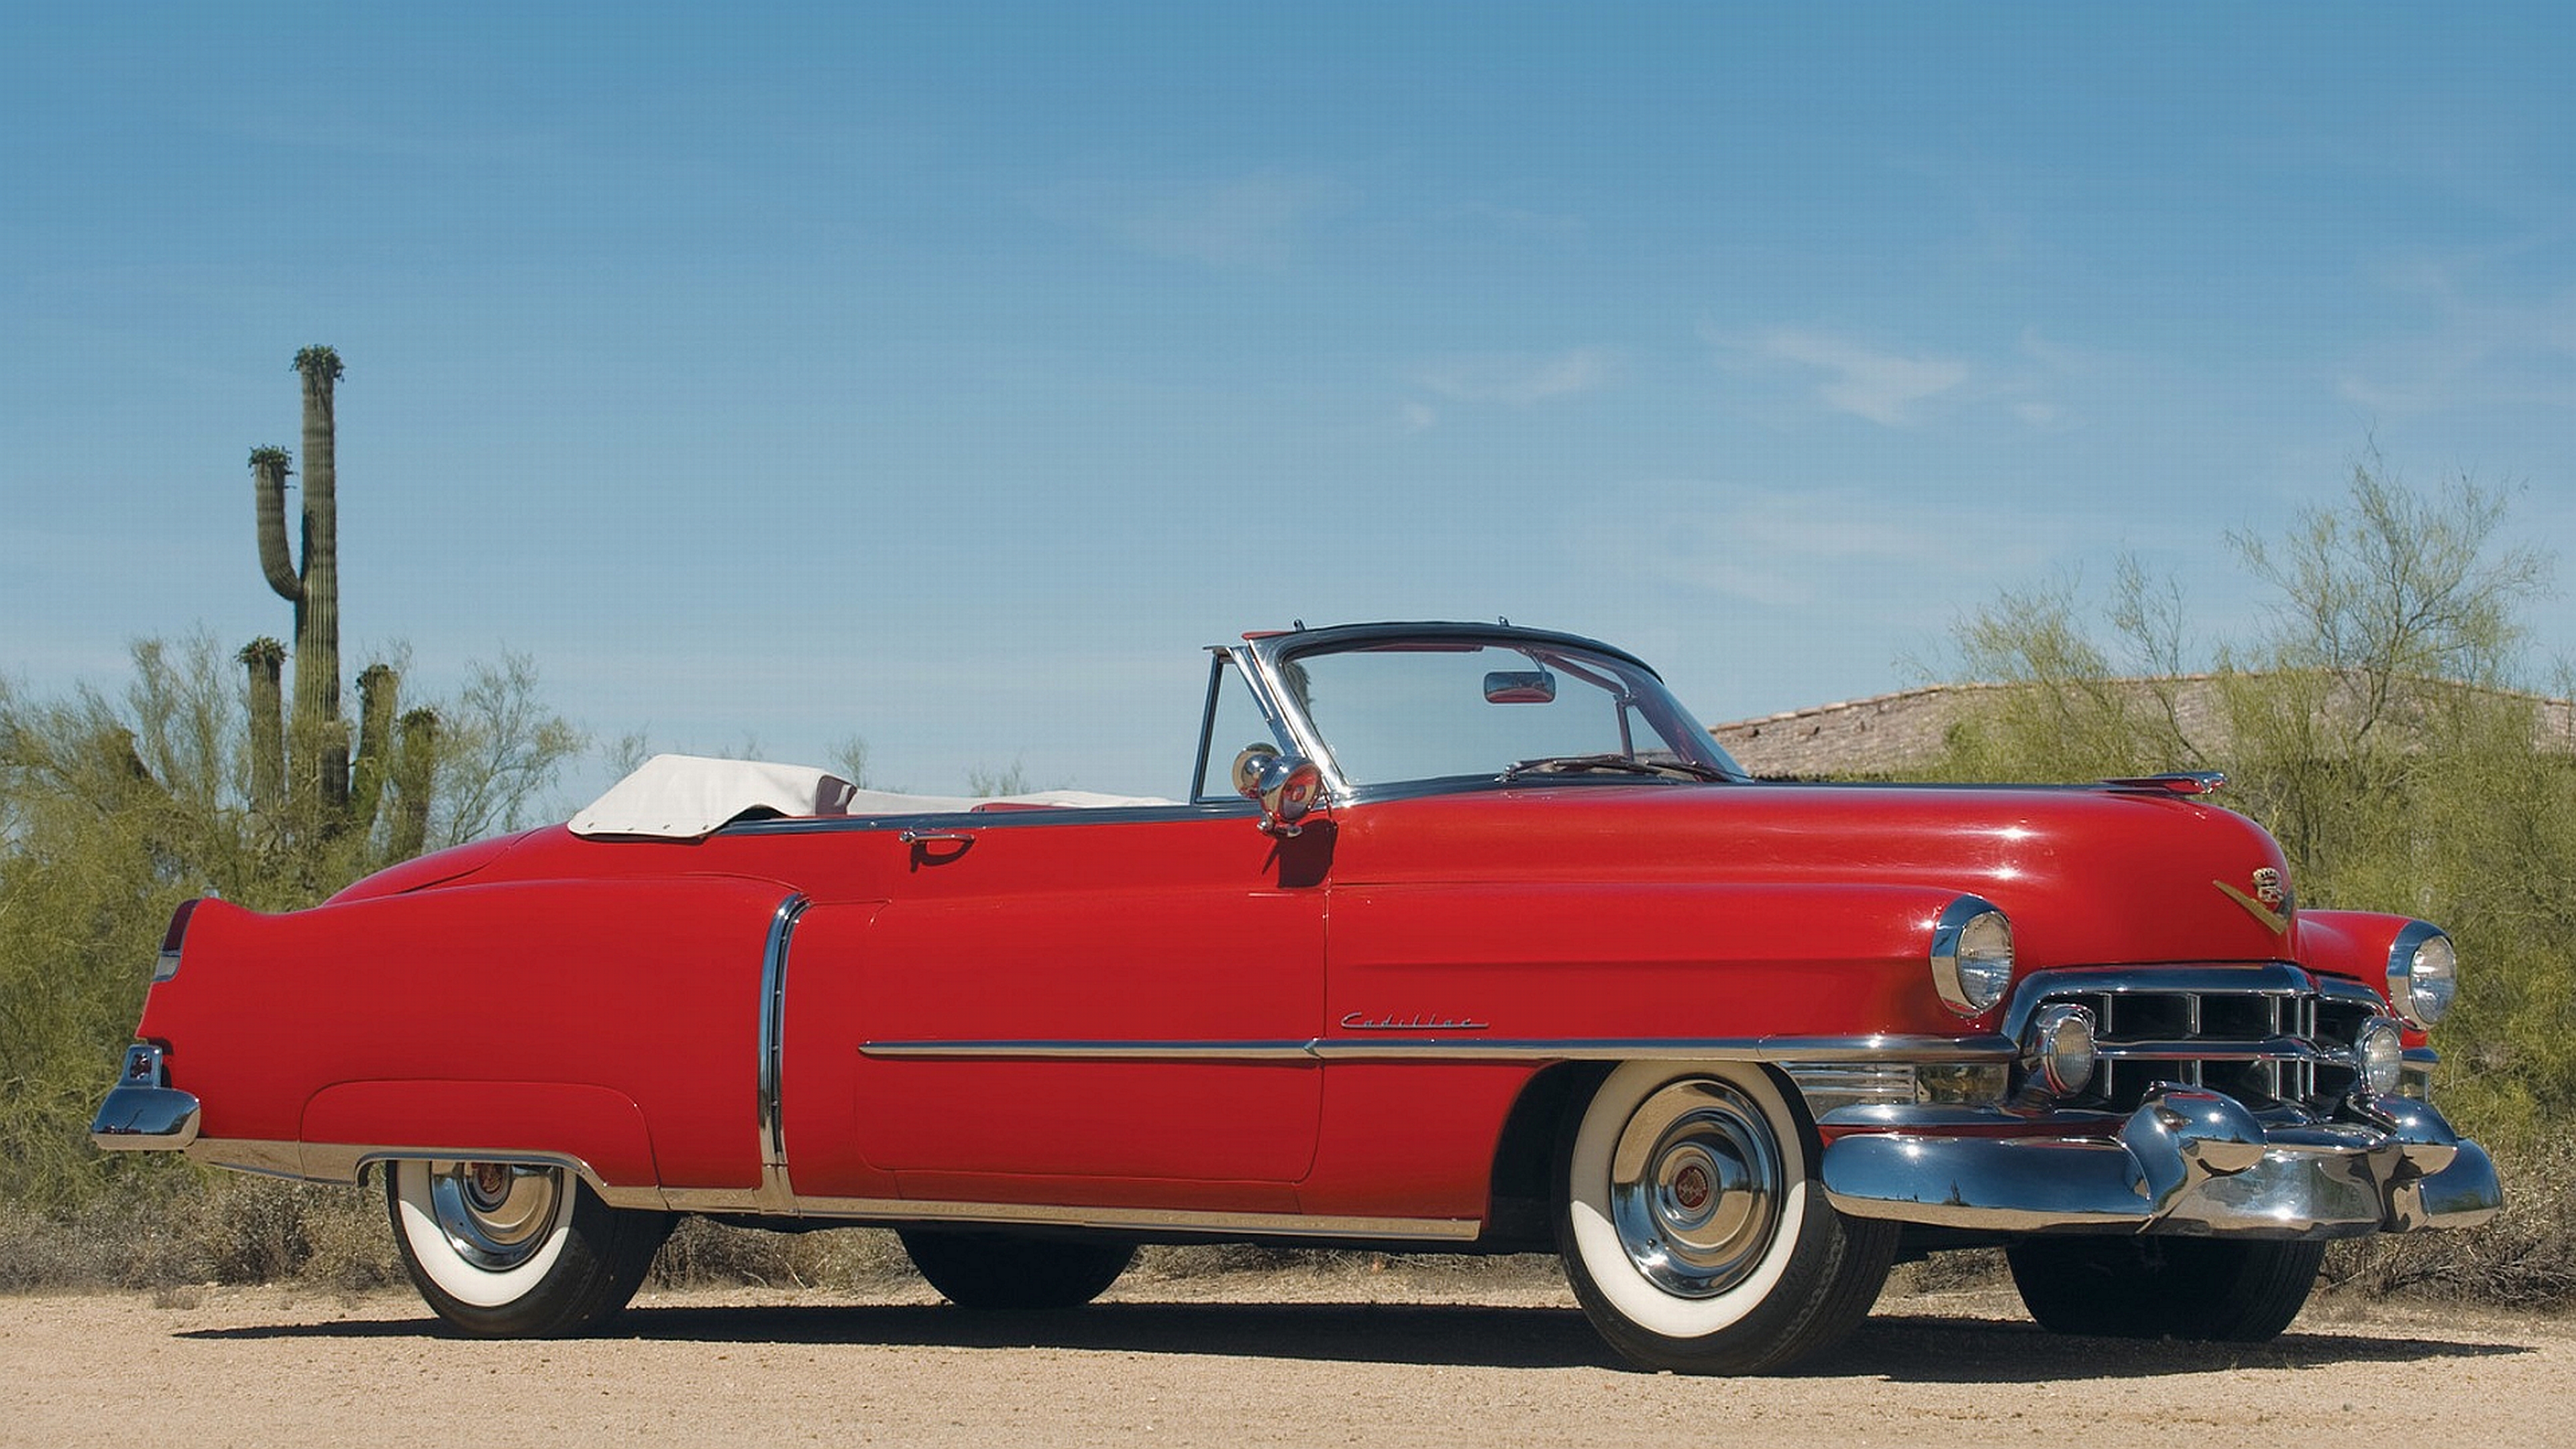 1950 Cadillac Sixty-two Convertible